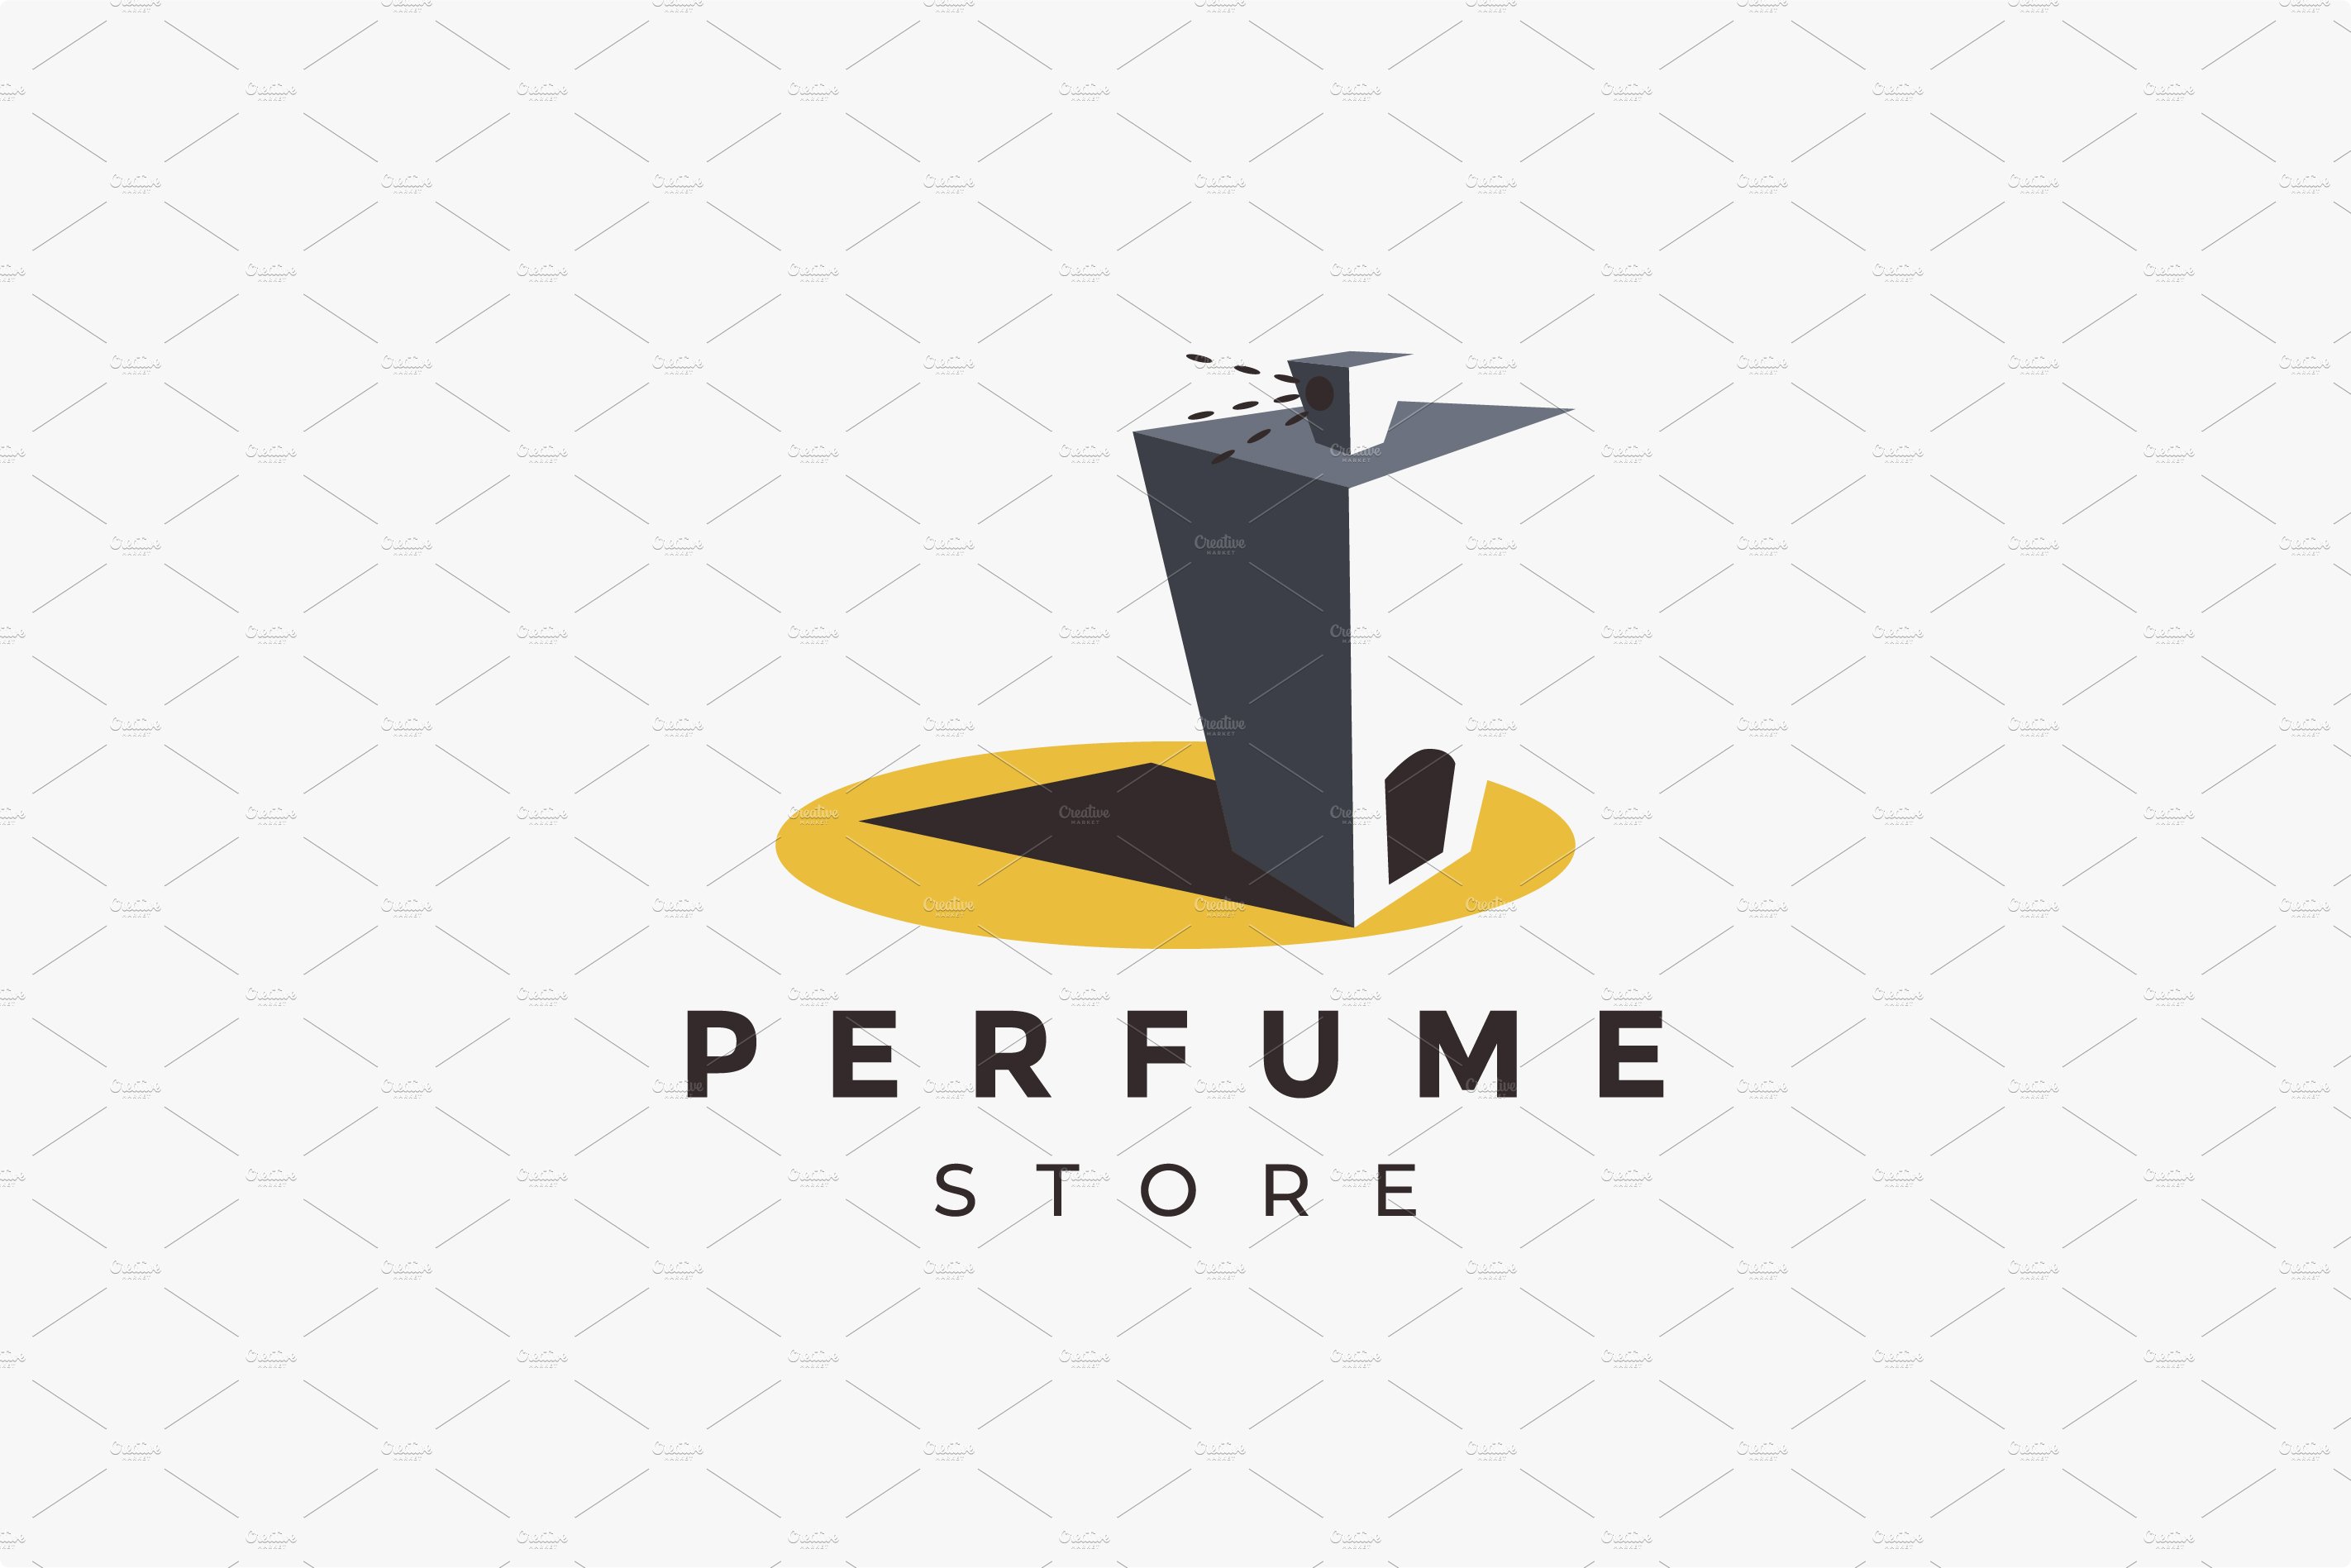 Perfume Brand Logo designs, themes, templates and downloadable